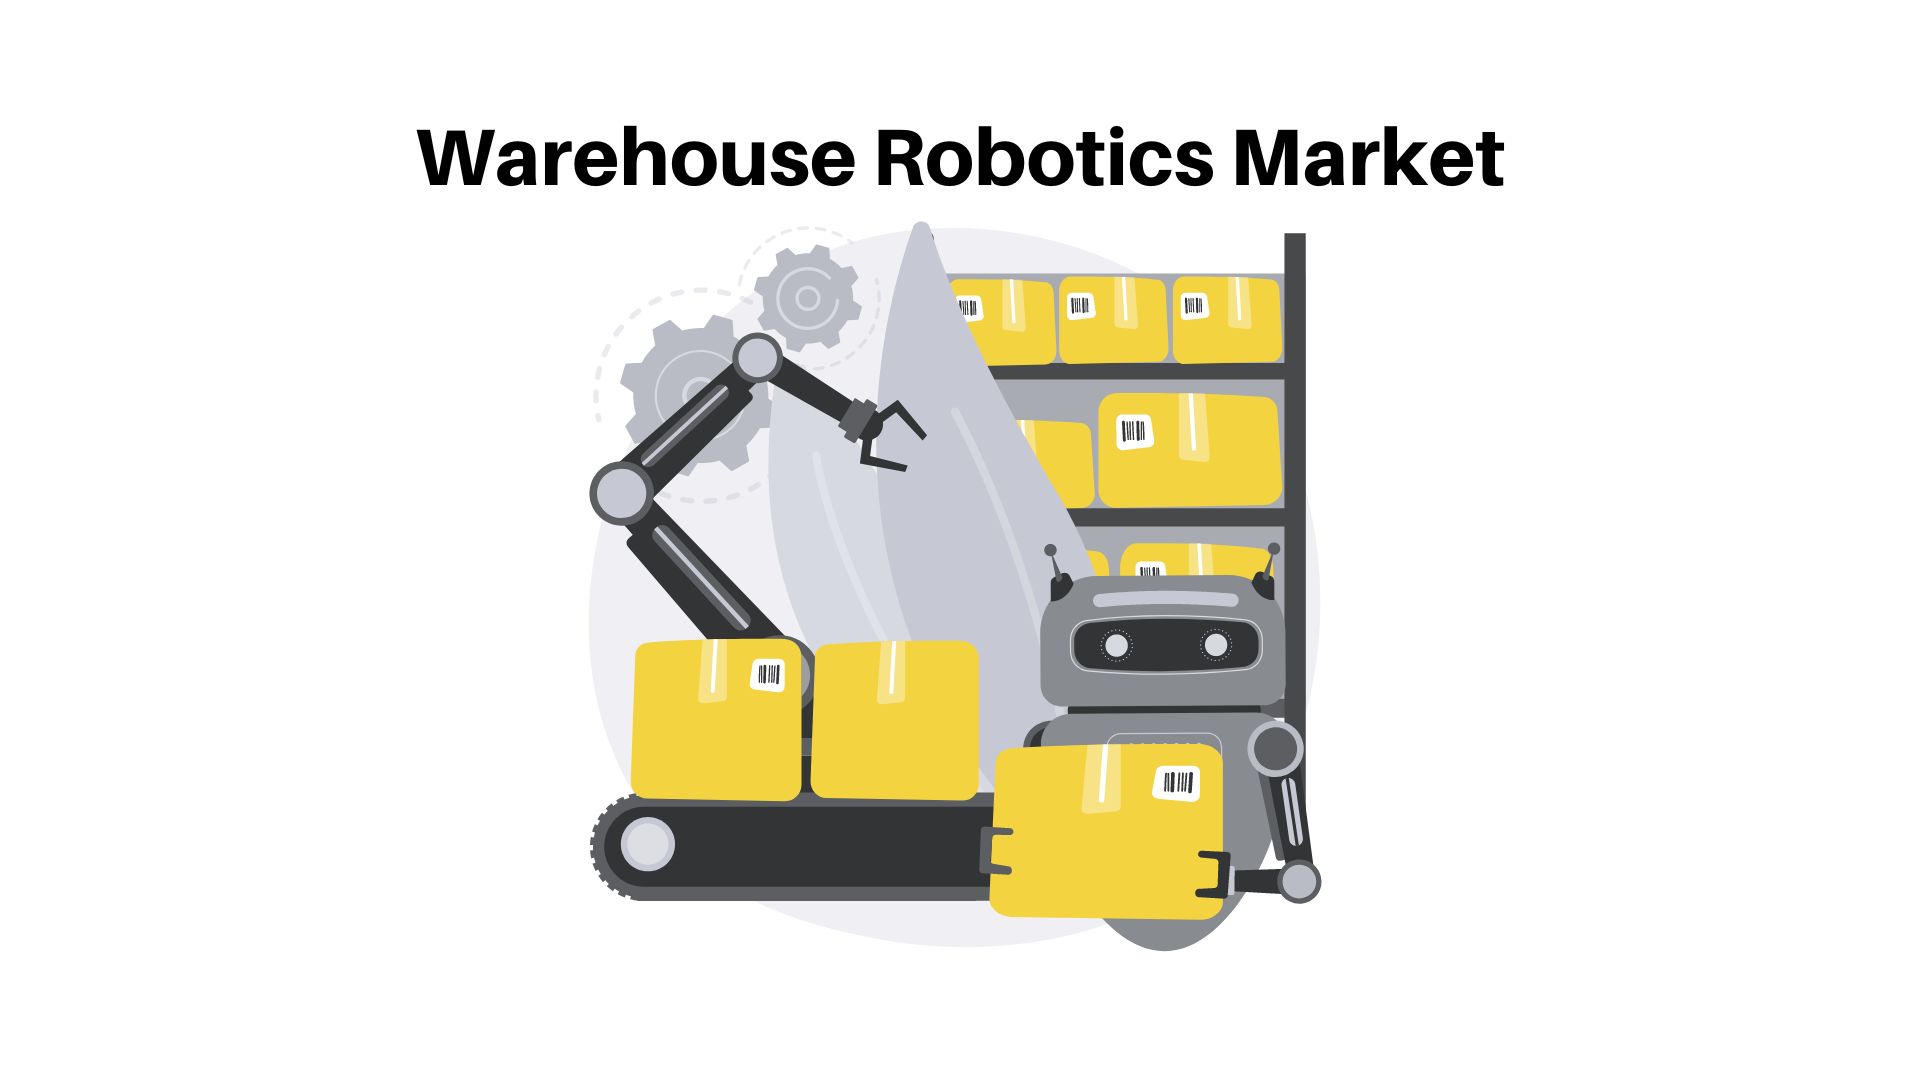 Warehouse Robotics Market to Offer Numerous Opportunities, Growing at A CAGR of 14% through 2032